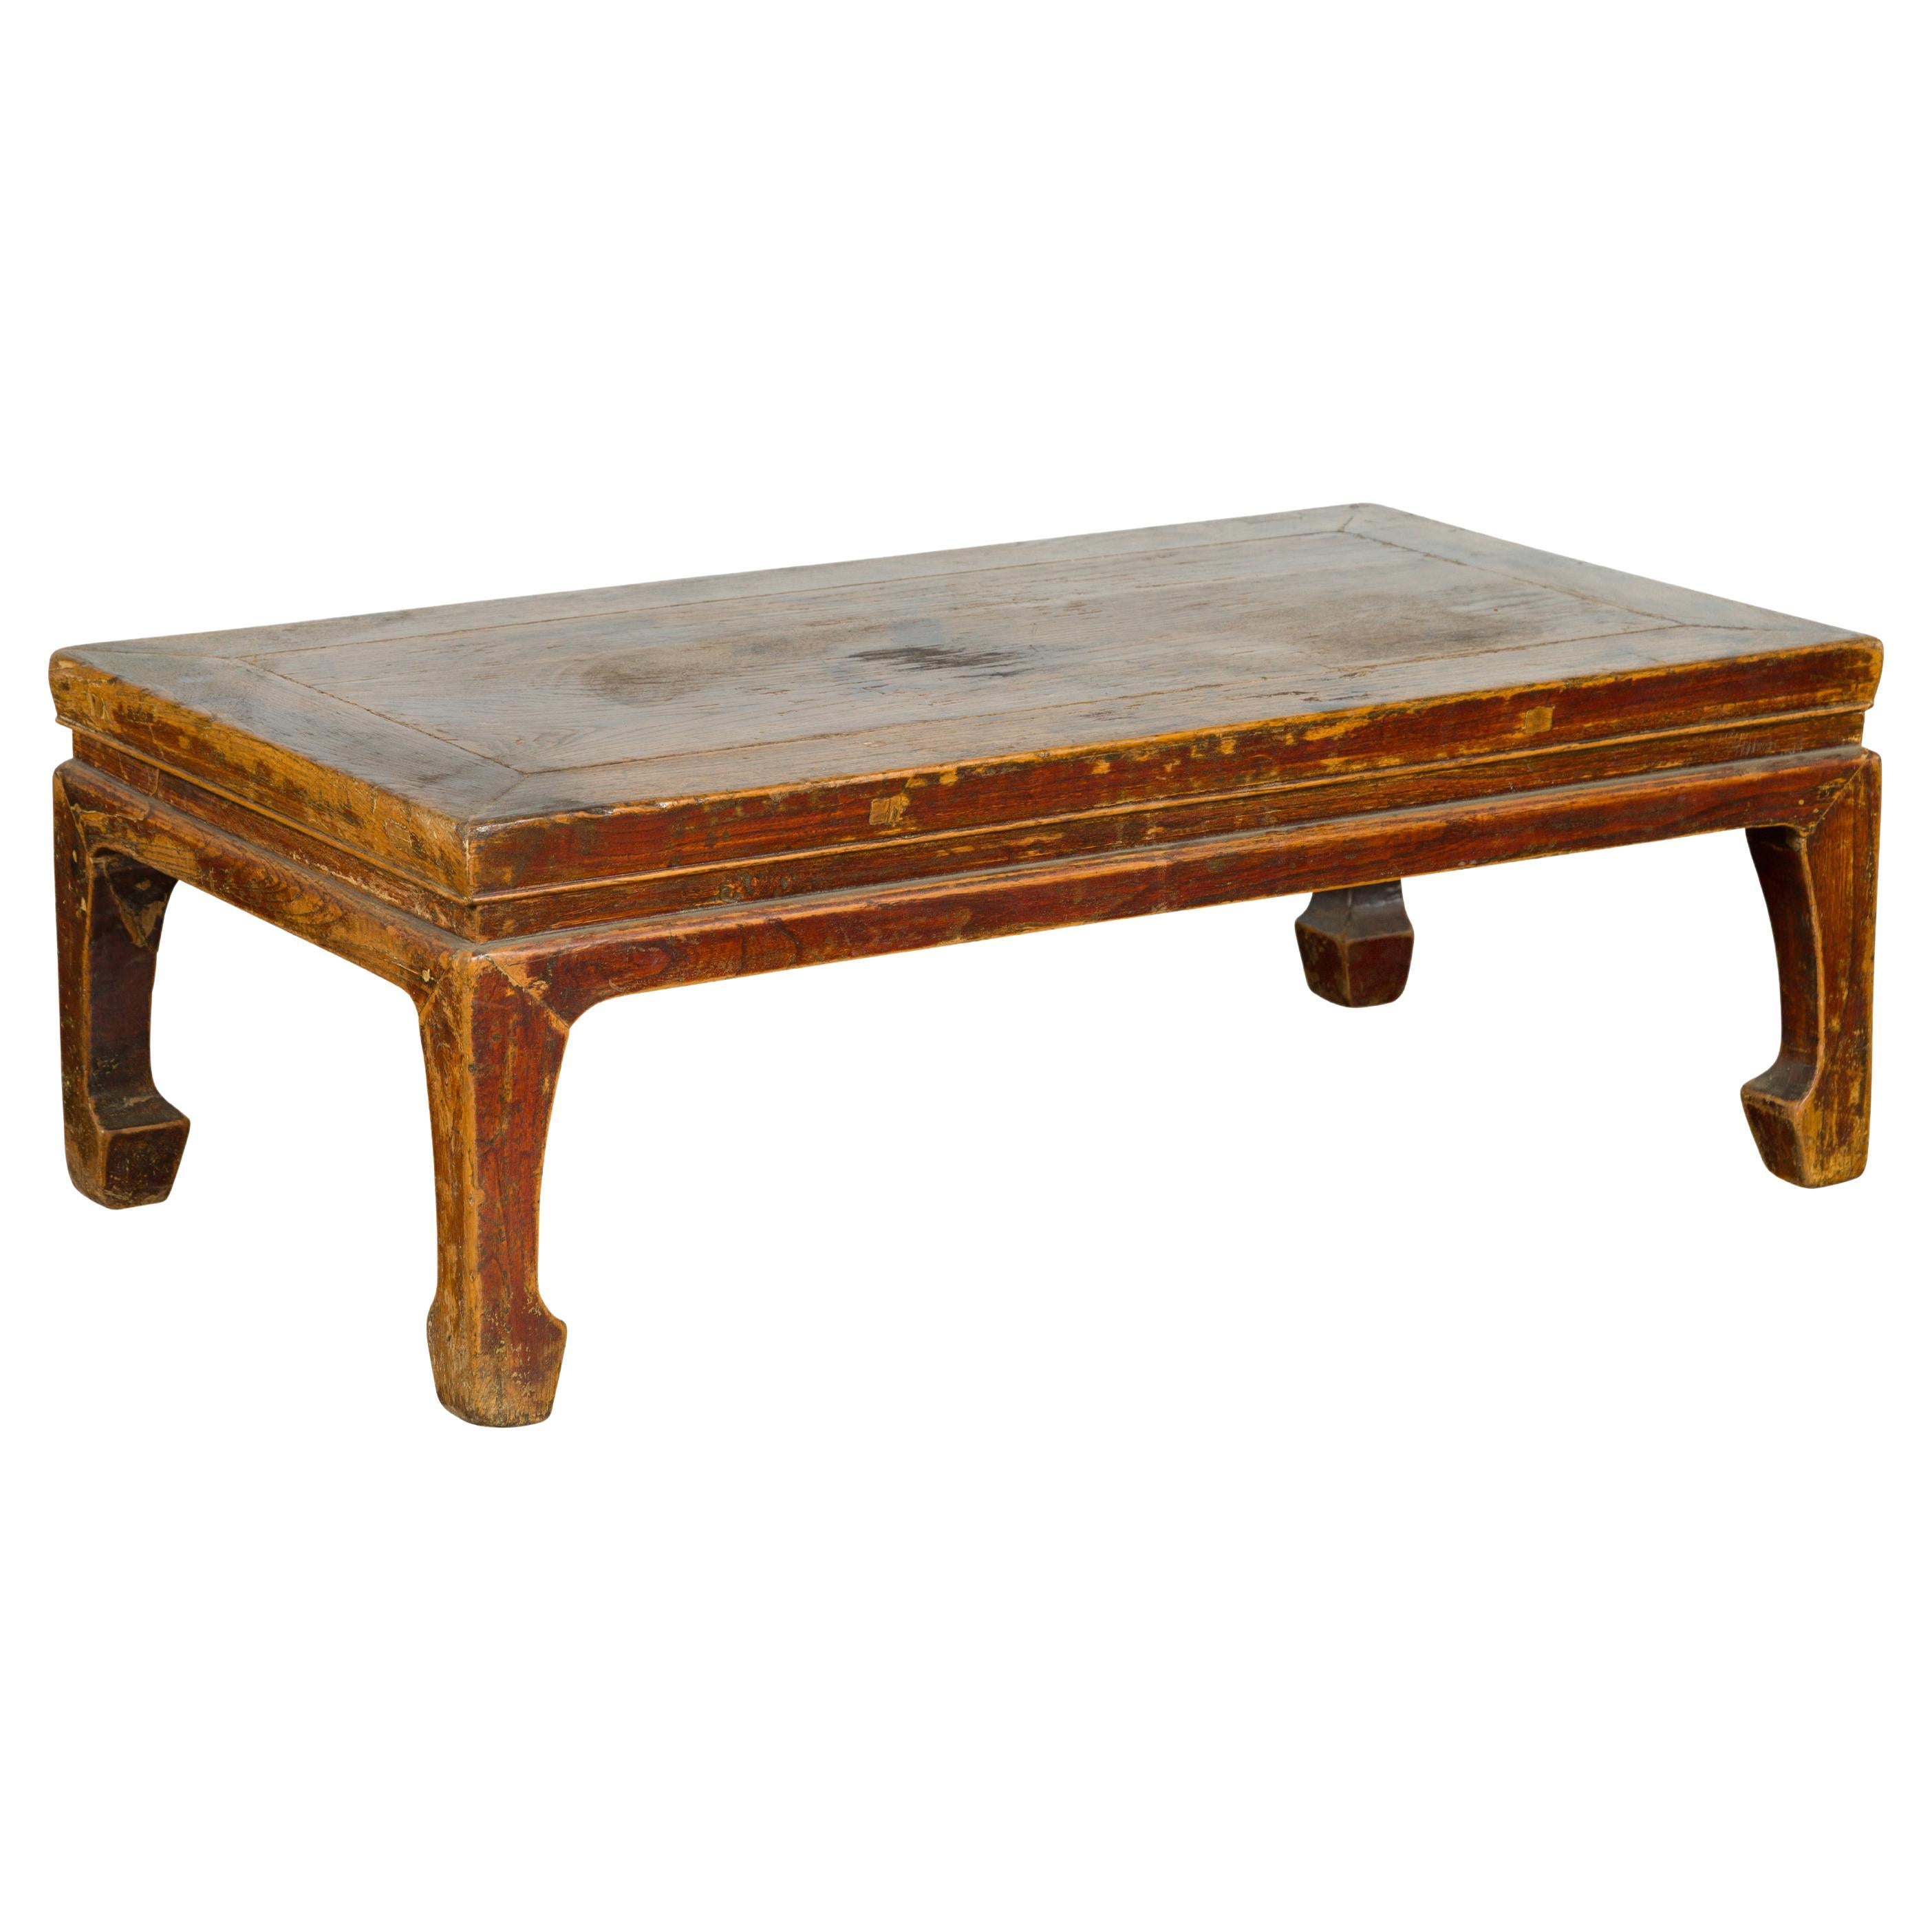 Chinese Qing Dynasty 19th Century Low Coffee Table with Distressed Patina For Sale